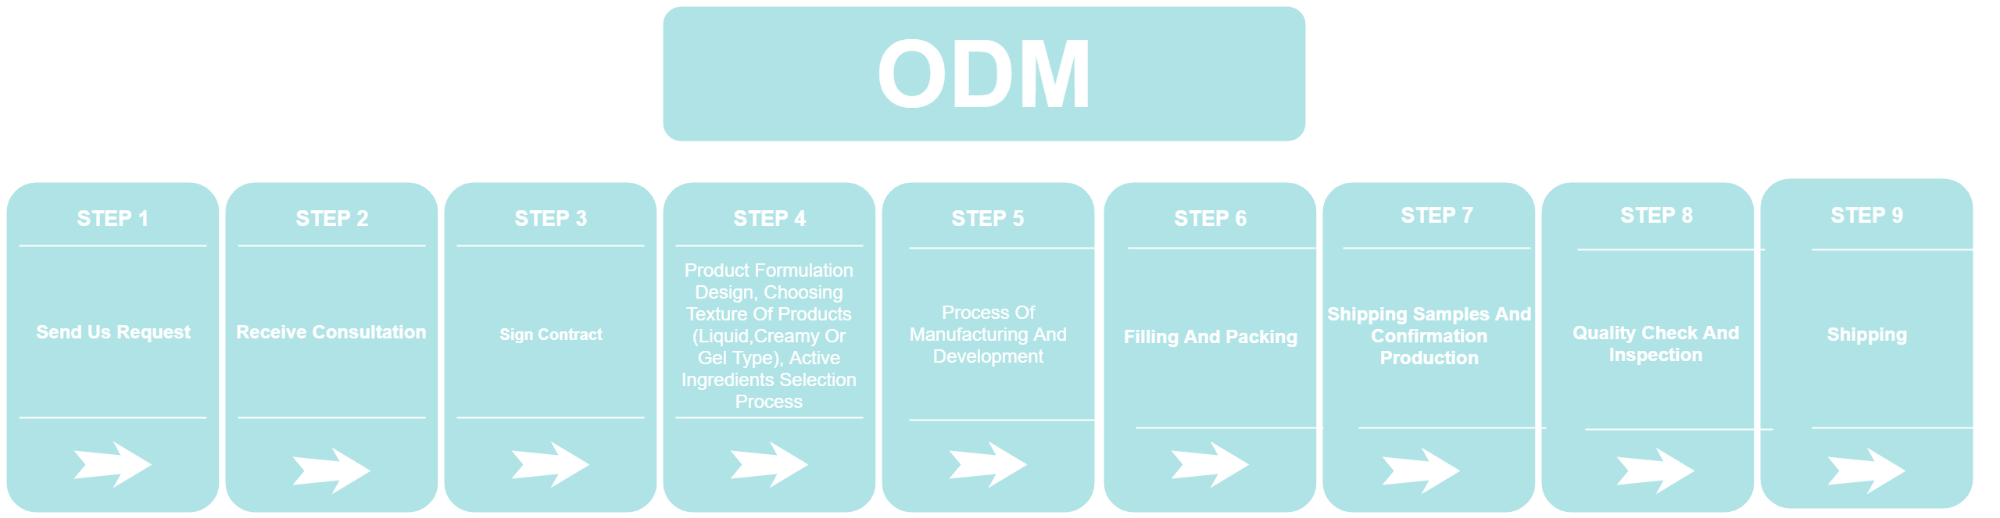 OEM and ODM in the Gift Industry